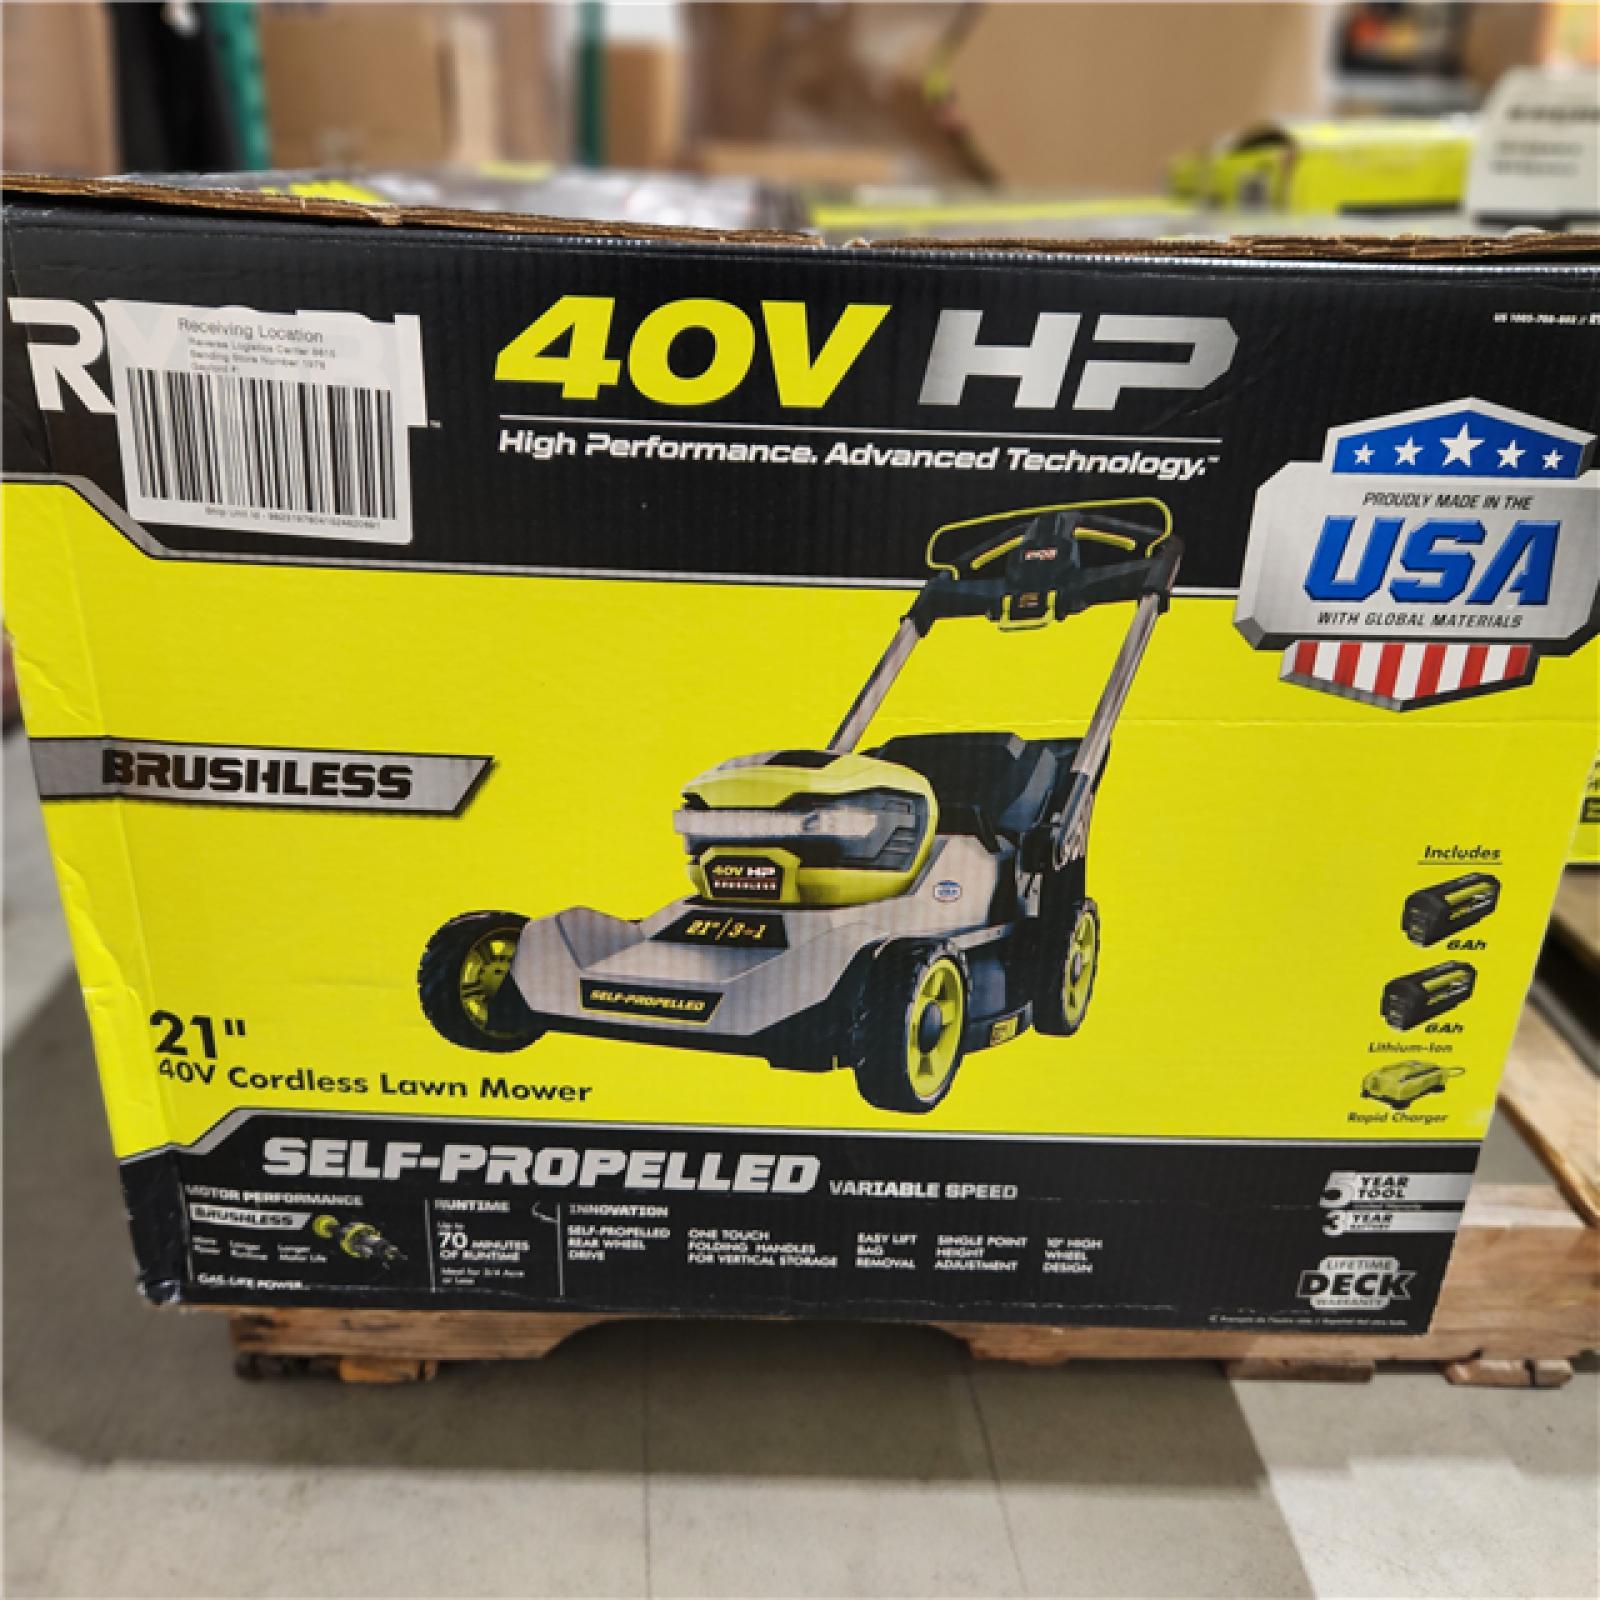 Dallas Location - As-Is RYOBI 40V HP Brushless 21 in.Self-Propelled Lawn Mower with (2) 6.0 Ah Batteries and Charger